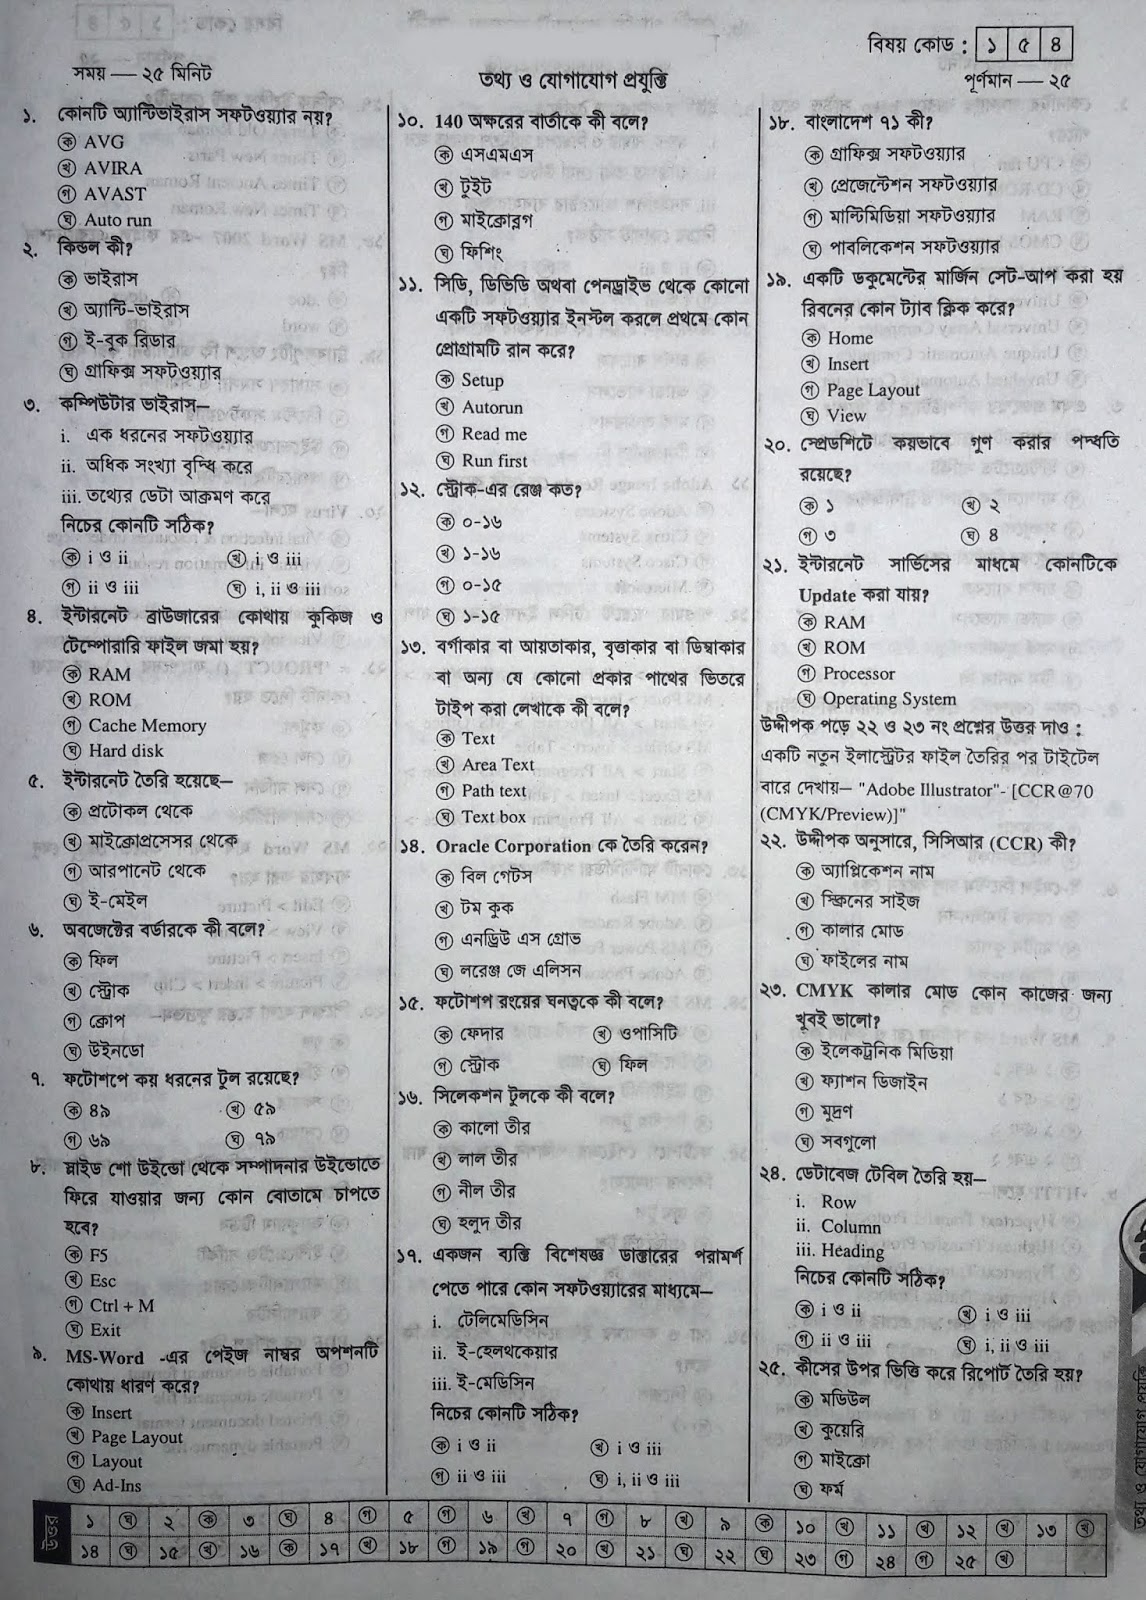 SSC ICT suggestion, question paper, model question, mcq question, question pattern, syllabus for dhaka board, all boards